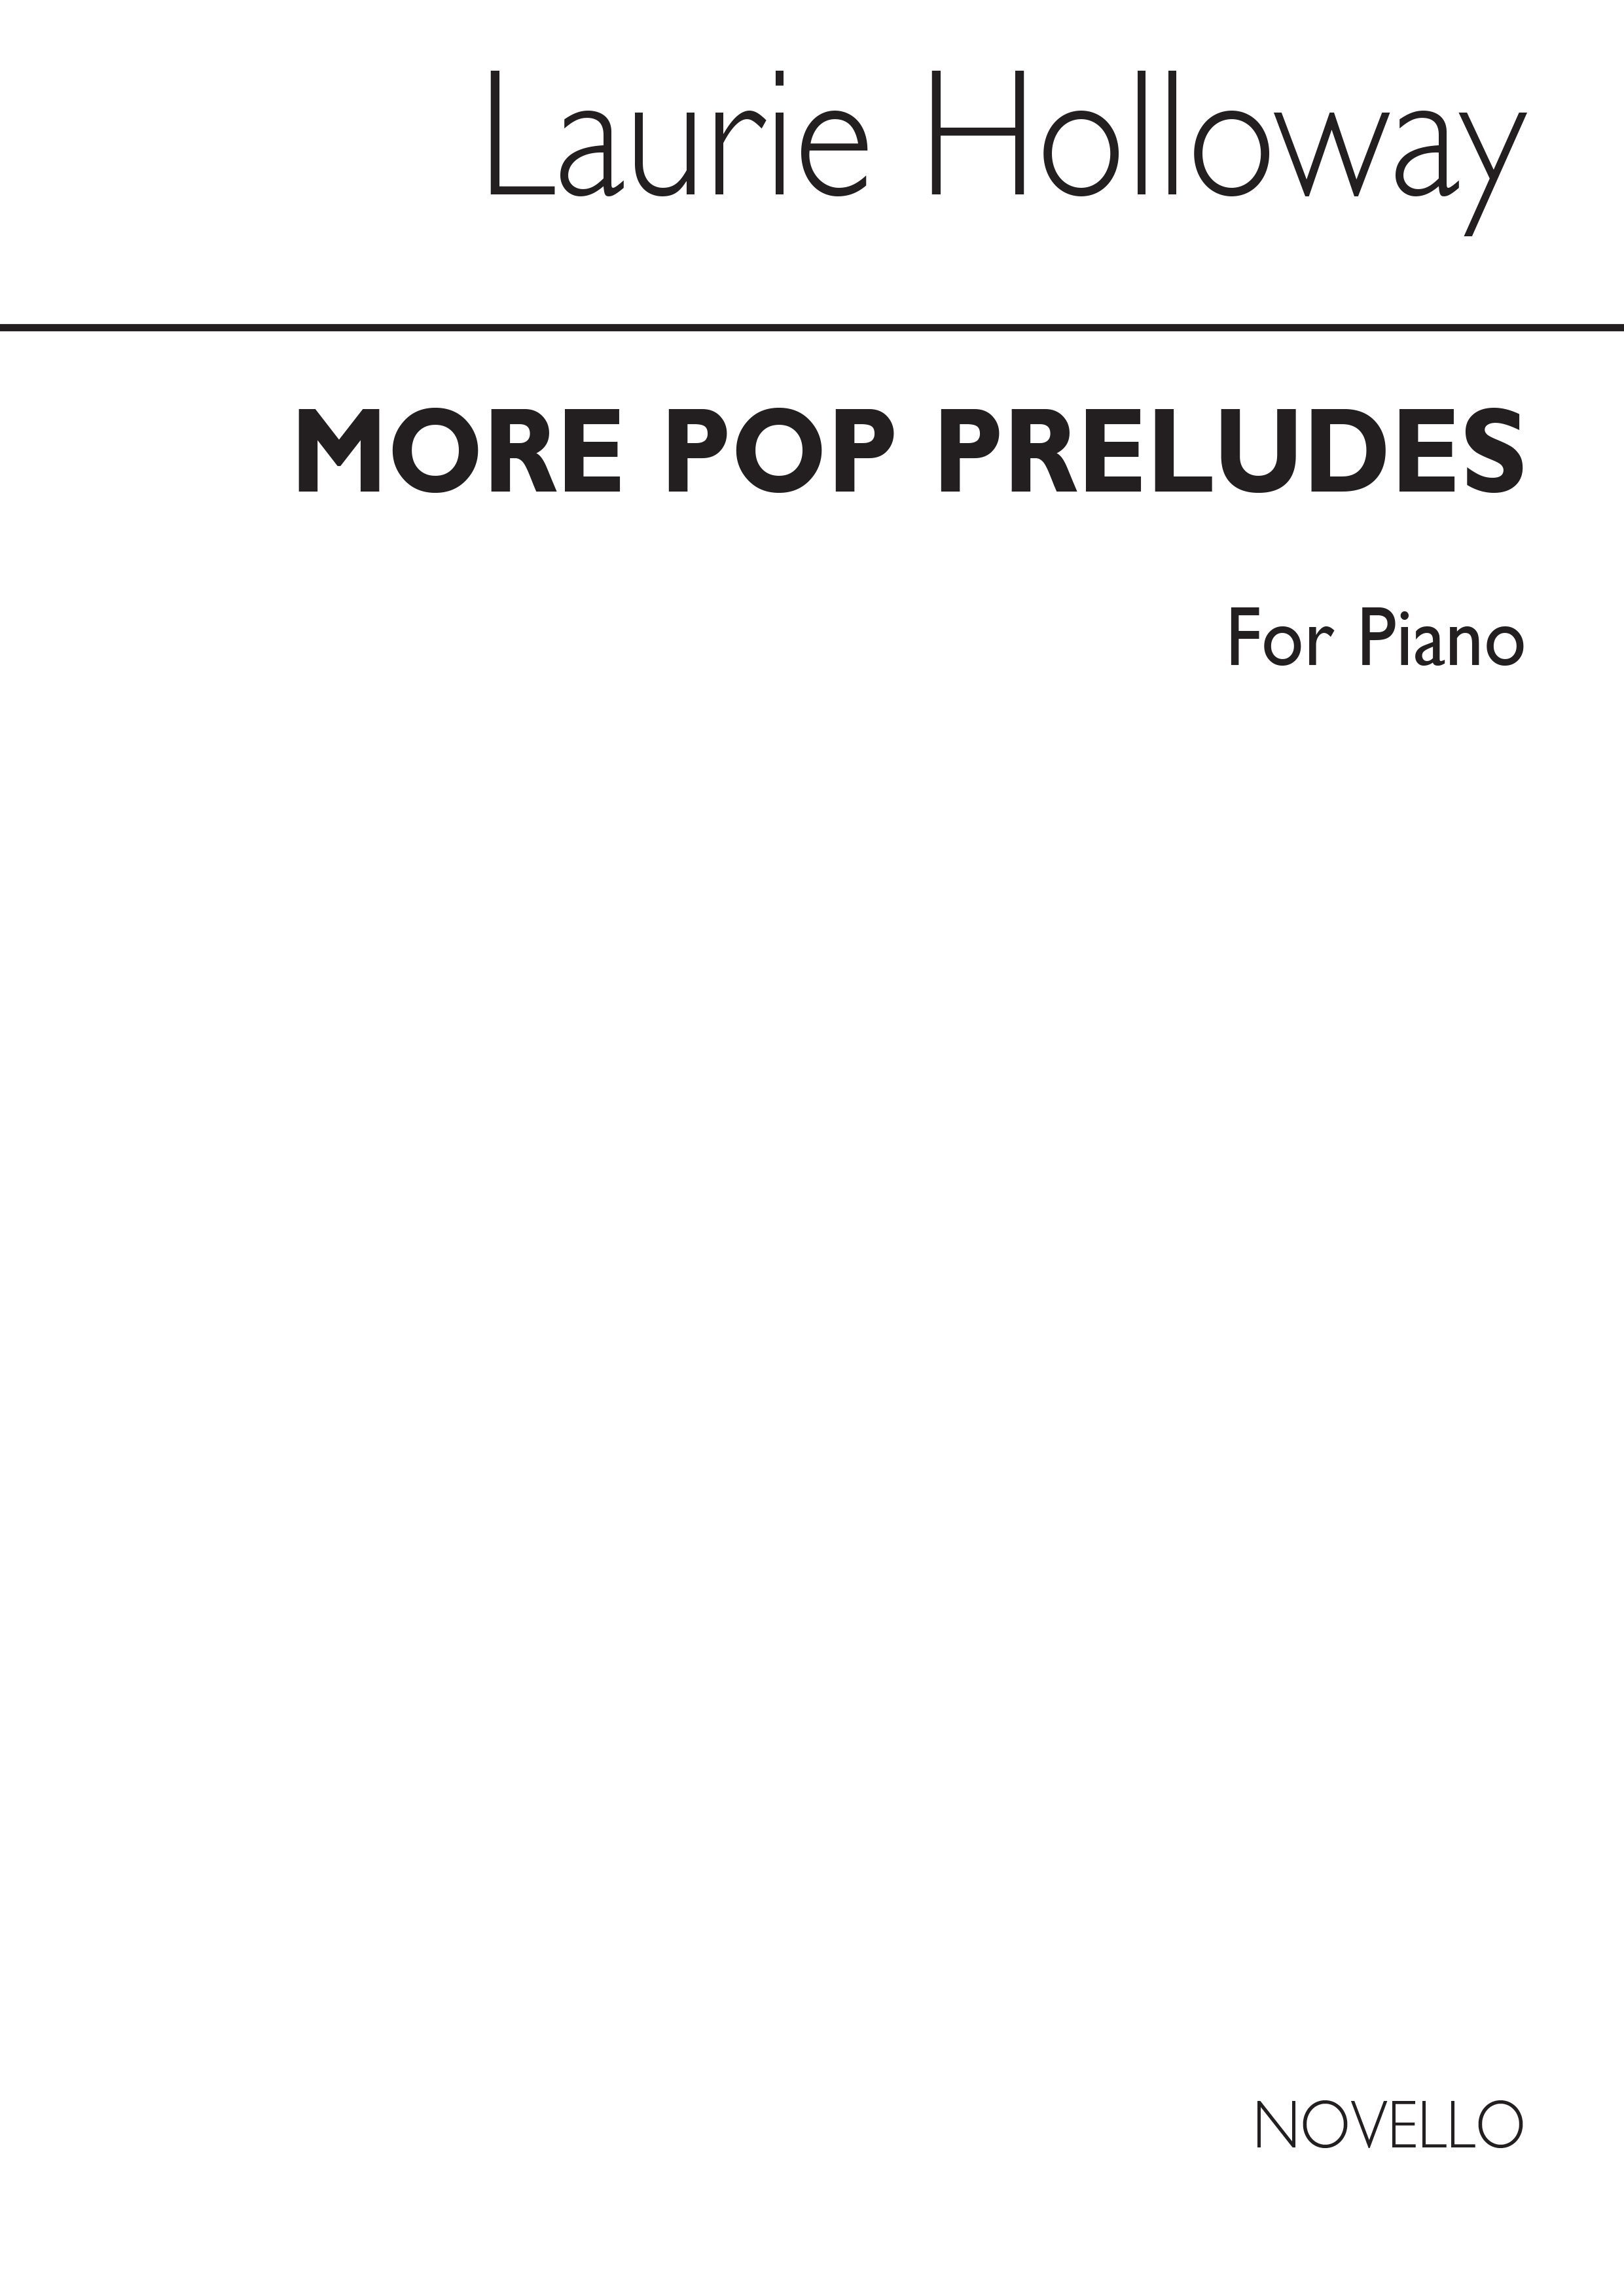 Holloway: More Pop Preludes for Piano